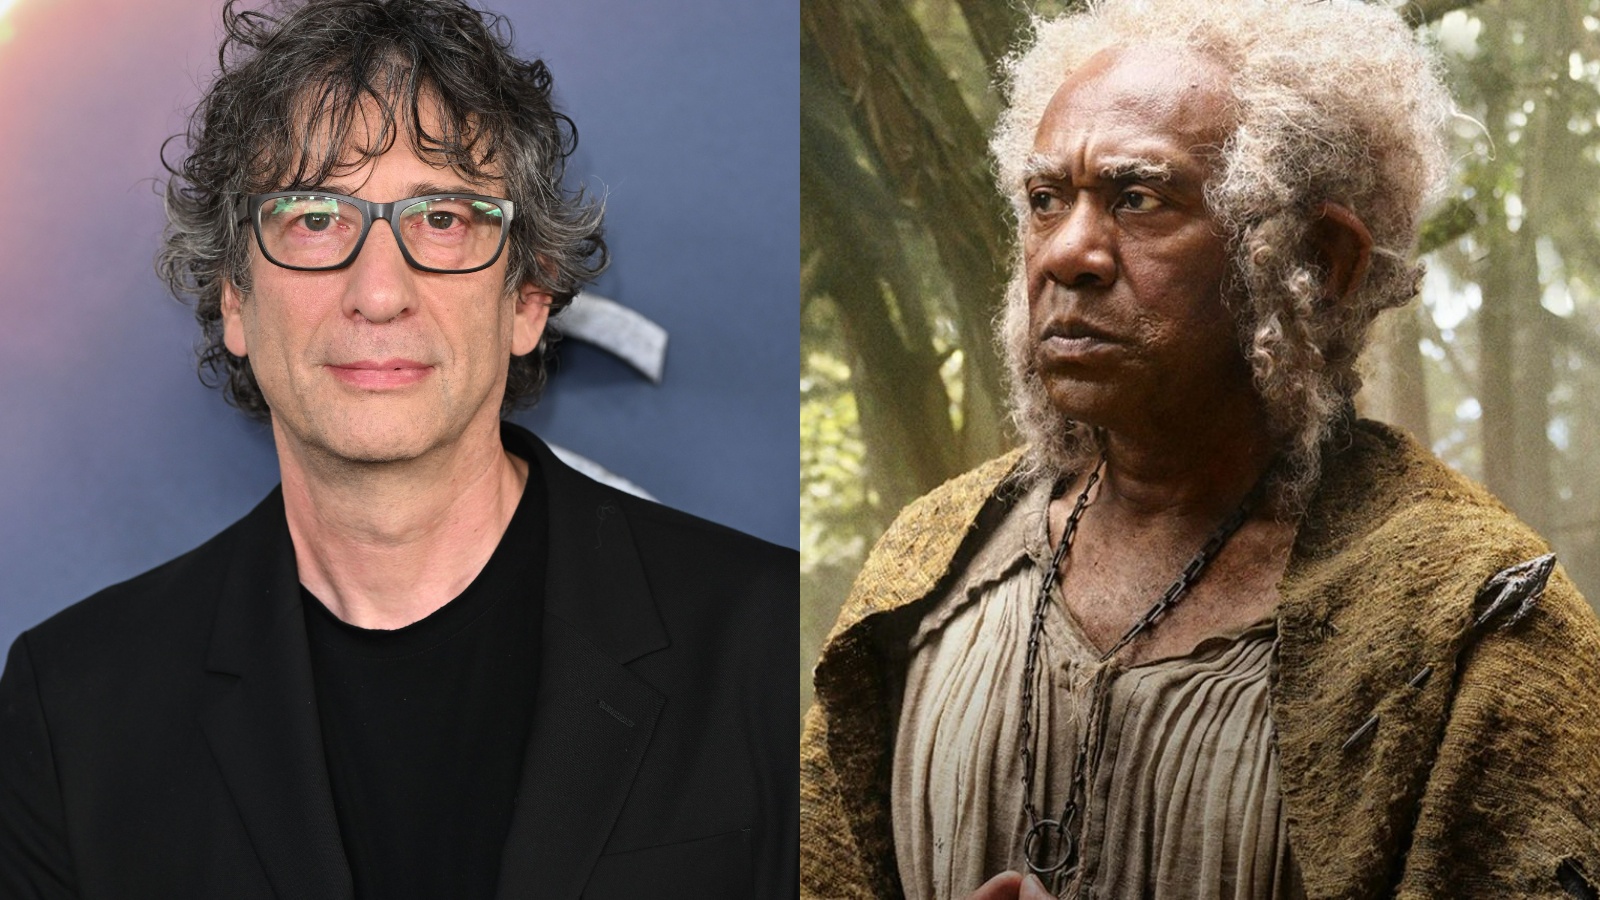 Neil Gaiman/Lenny Henry in 'The Lord of the Rings: The Rings of Power'